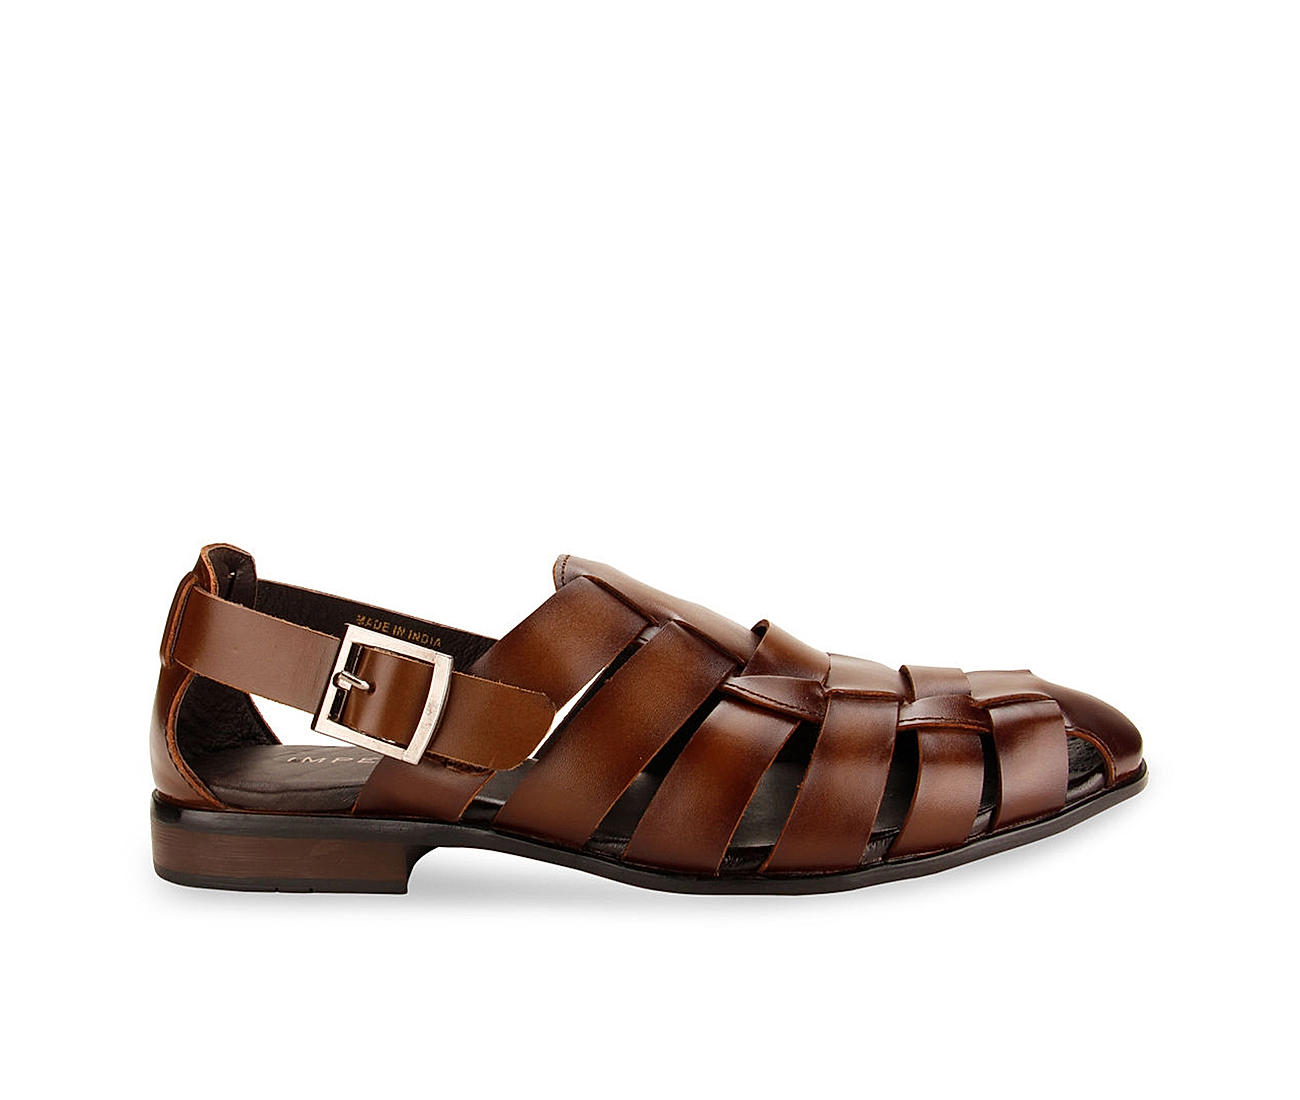 Buy Leather Sandals For Women Online In India At Best Price Offers | Tata  CLiQ